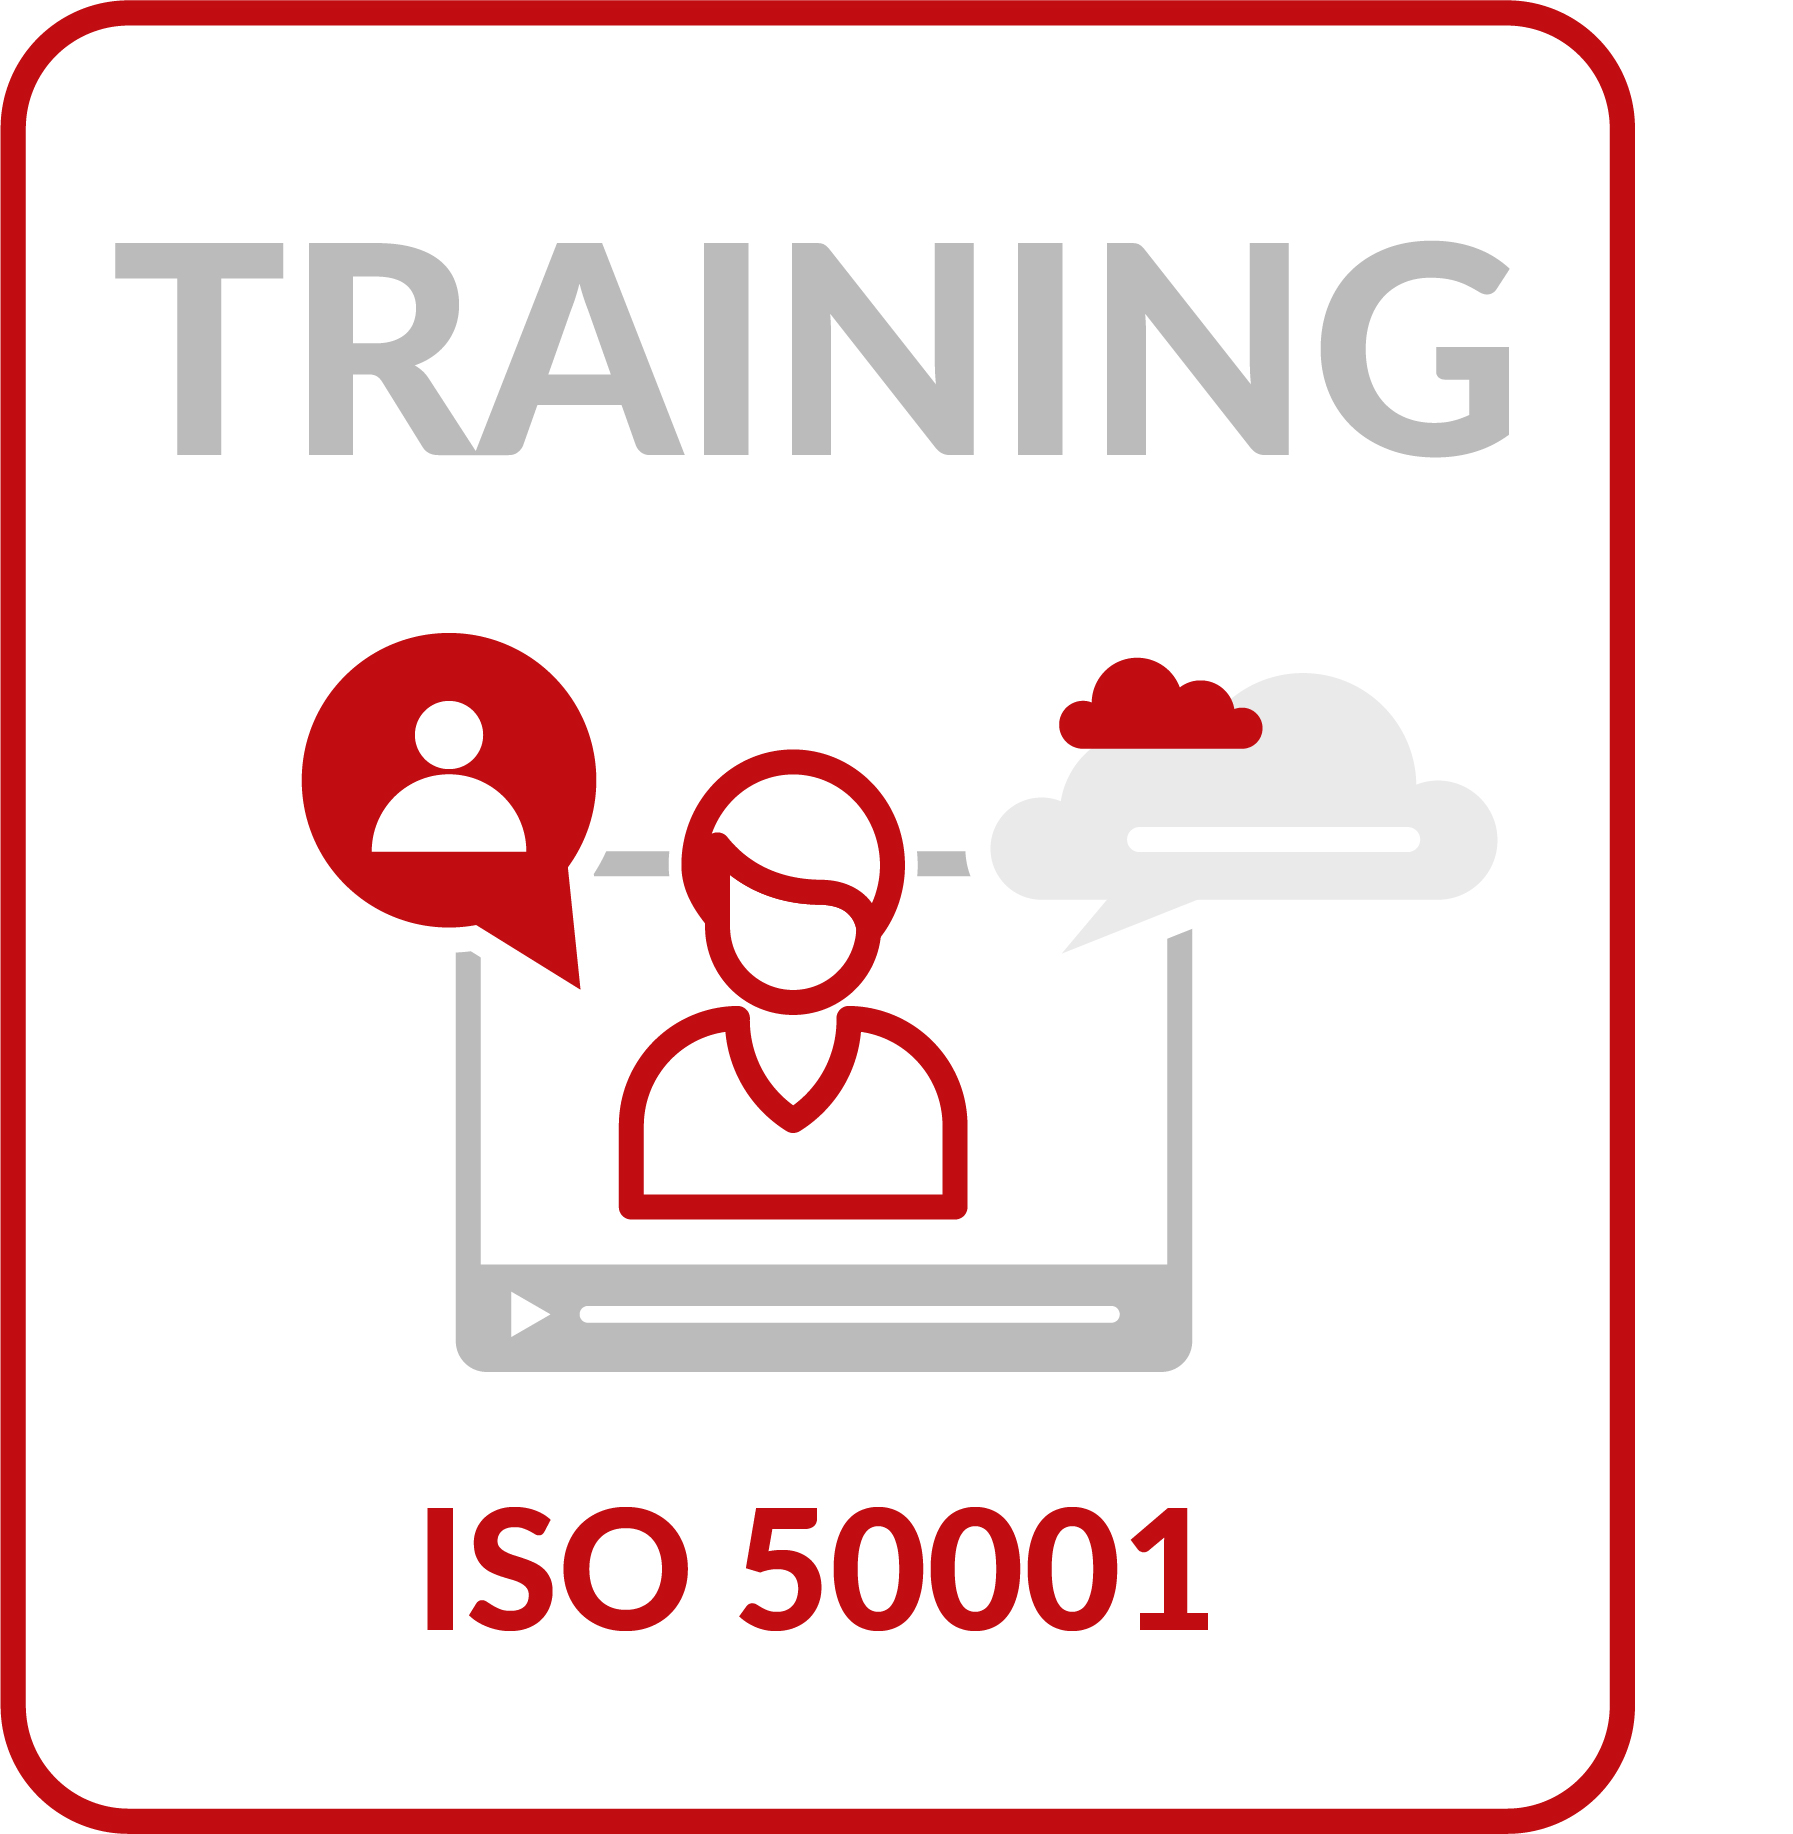 Training on ISO 50001 (Online)